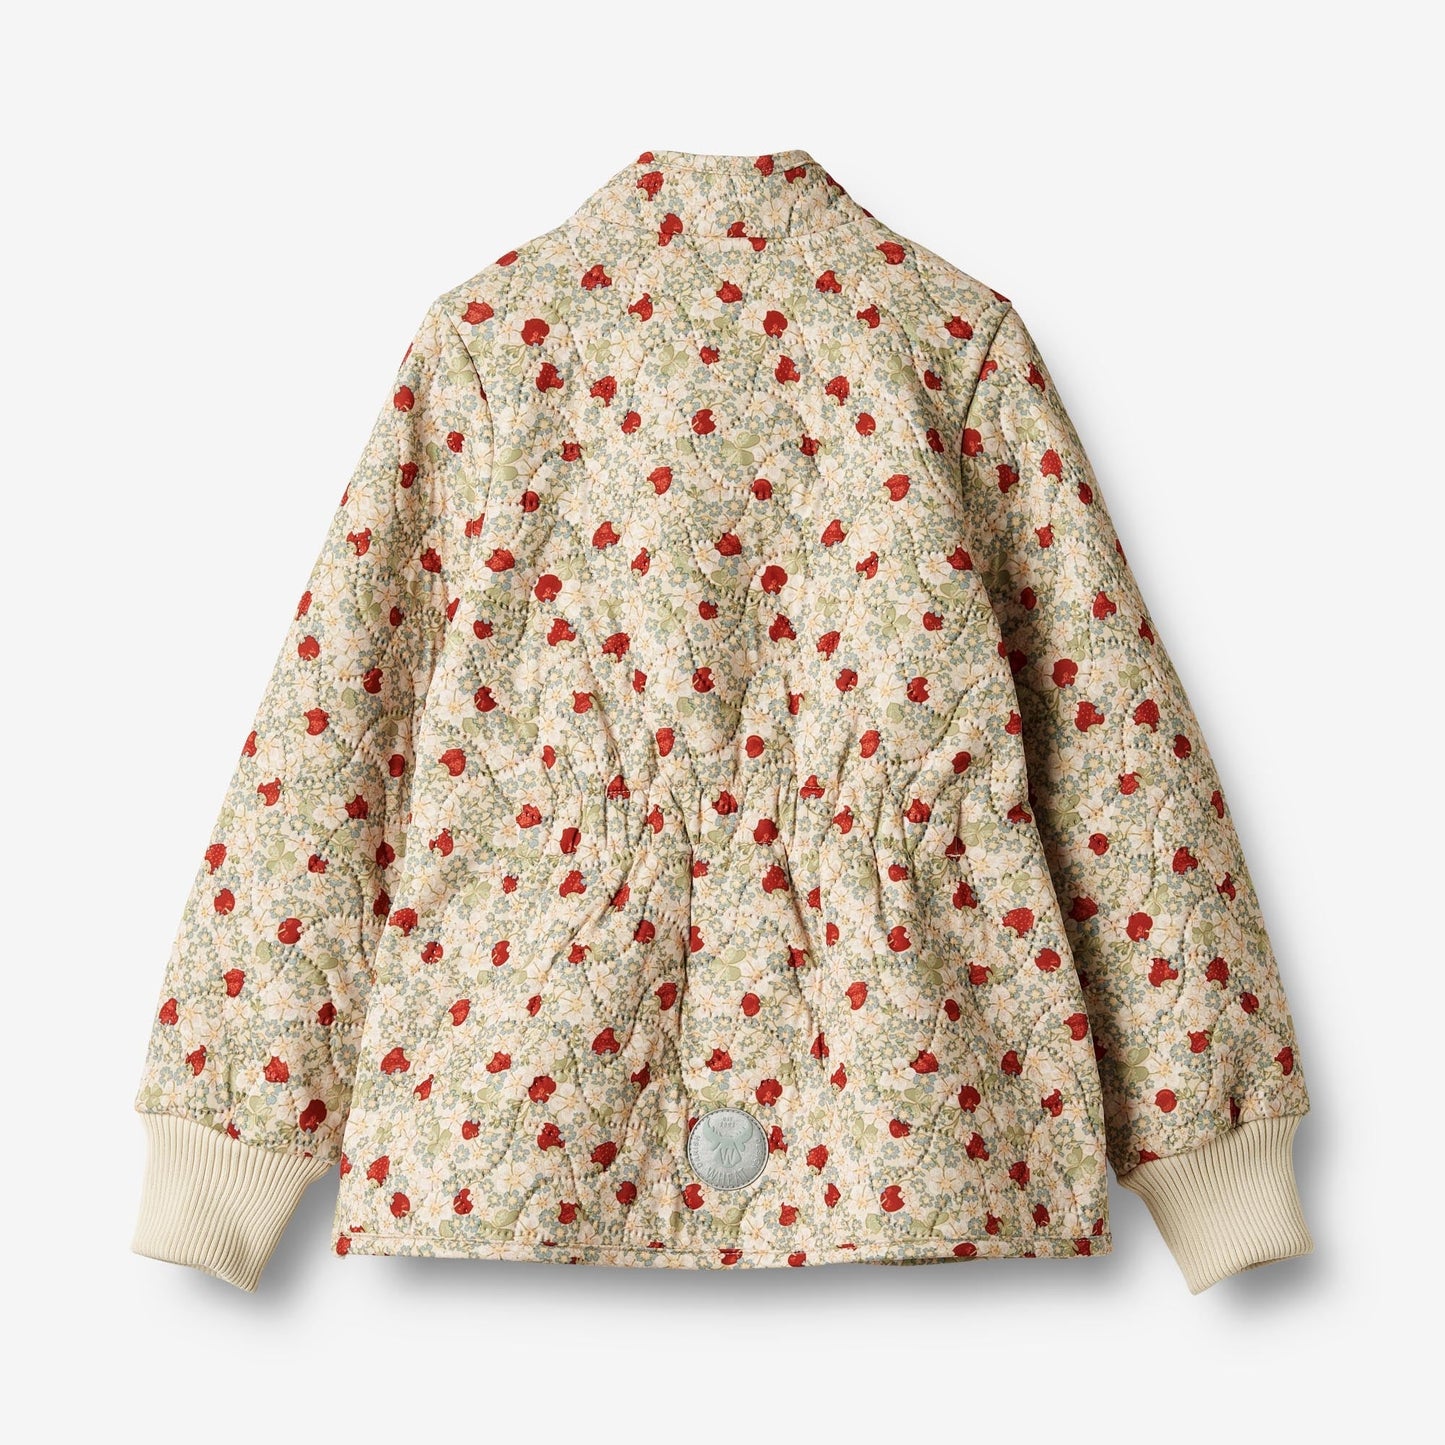 Wheat 'Thilde' Children's Thermo Jacket - Strawberry